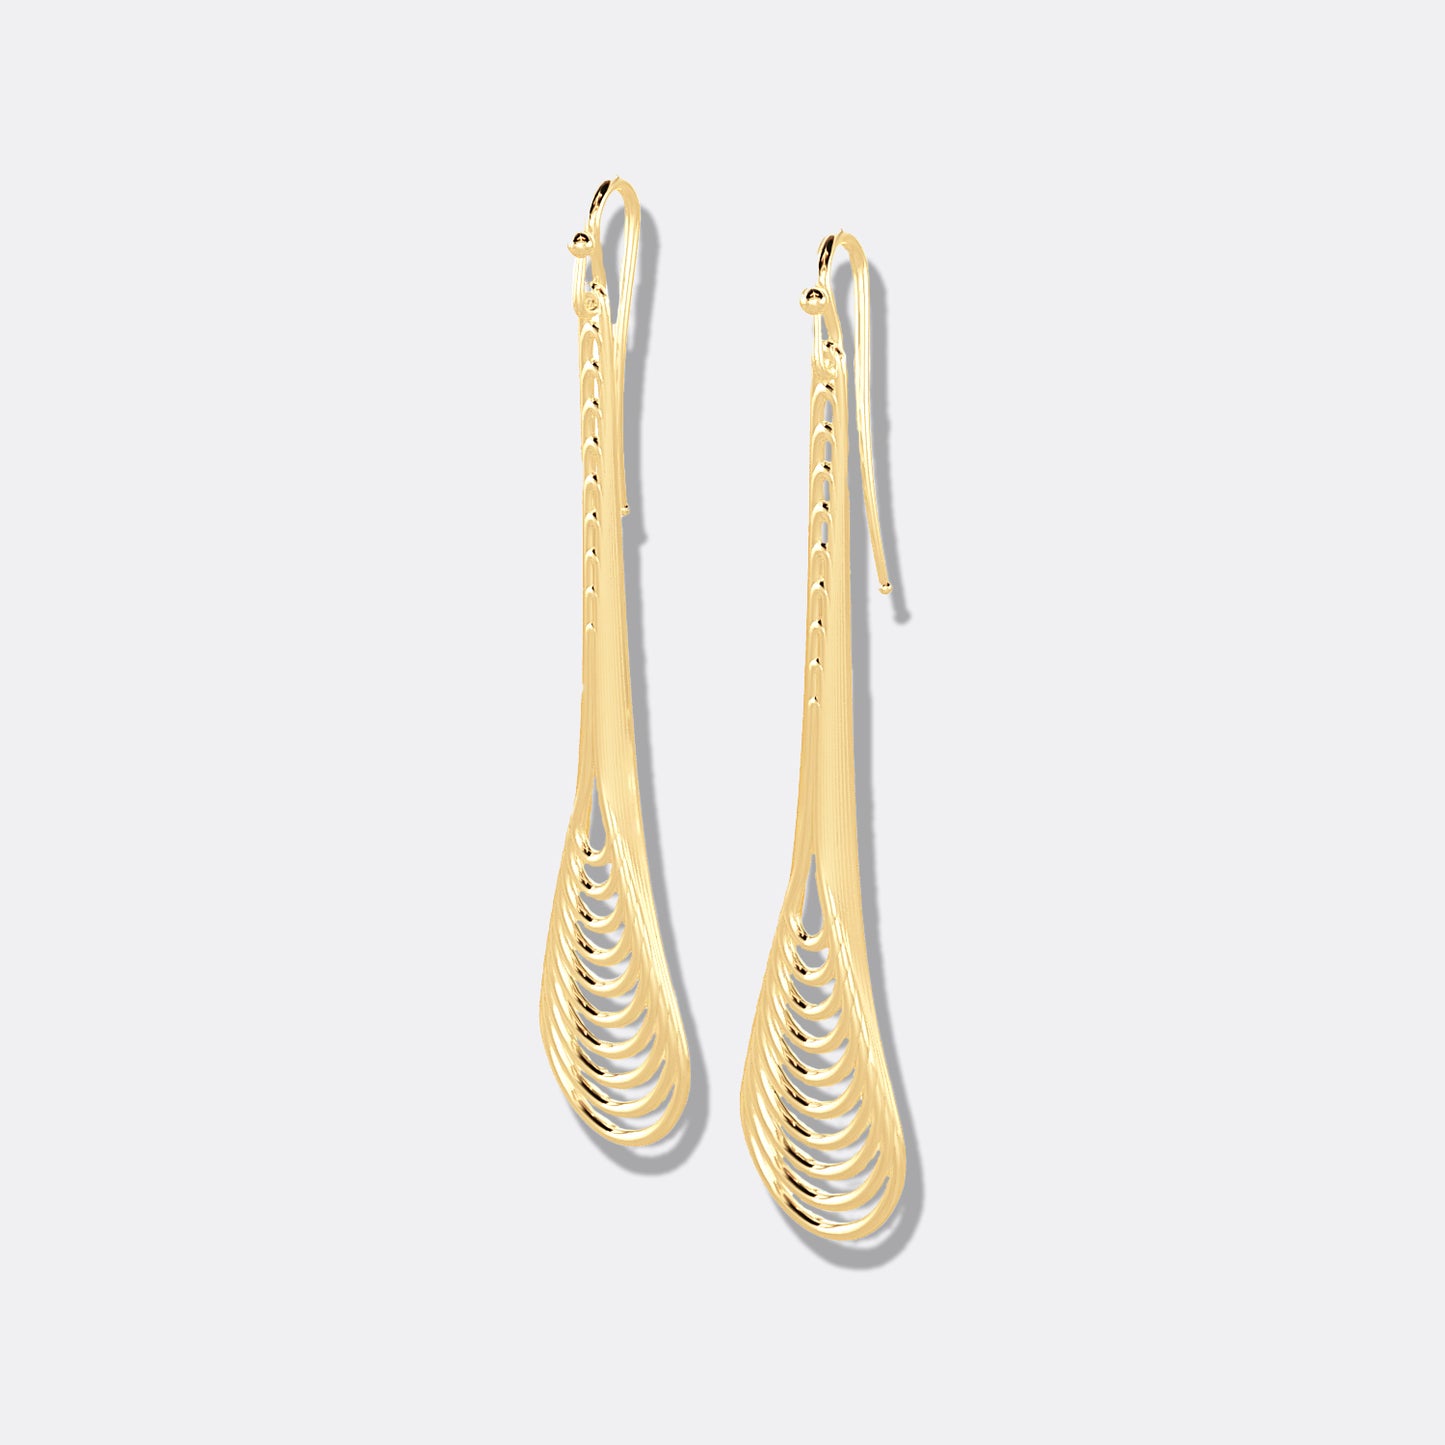 Beginning: 18ct Yellow Gold-Plated Sterling Silver Drop Earrings